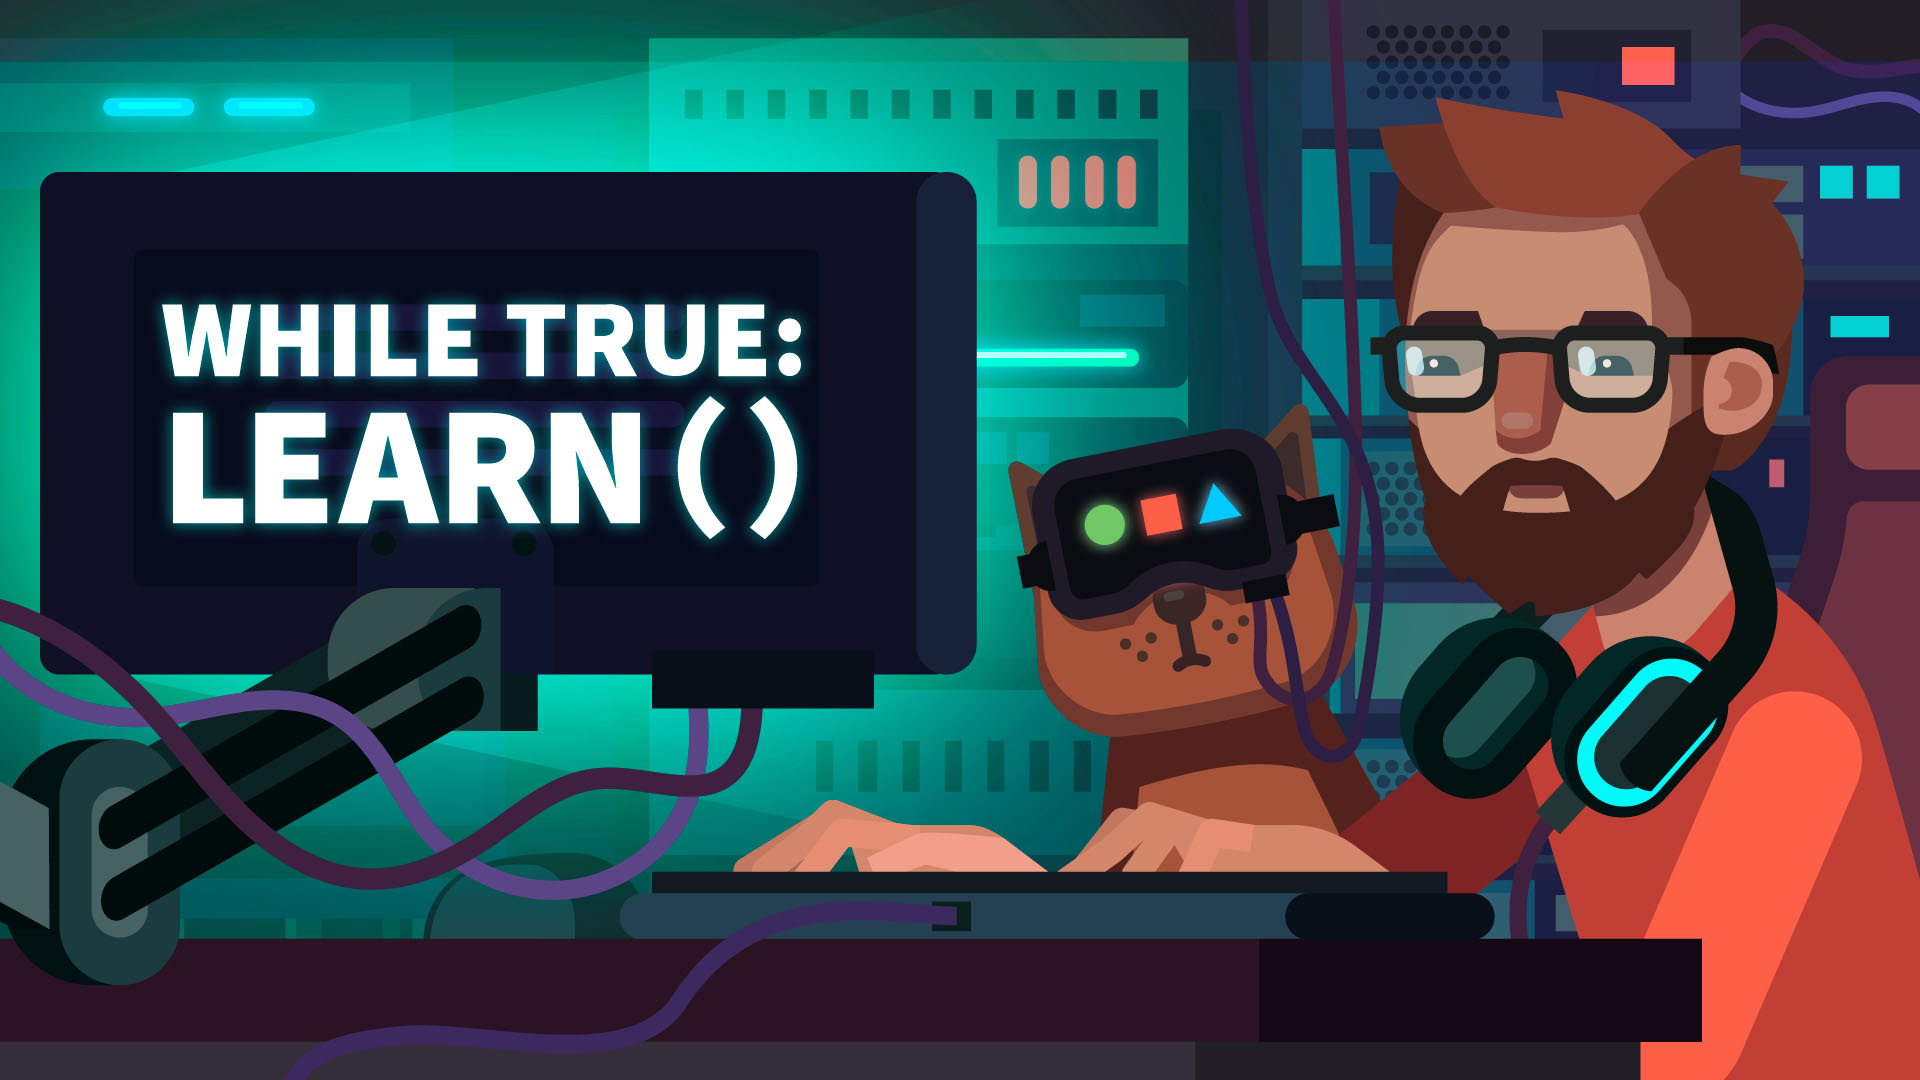 Video Game while True: learn() HD Wallpaper | Background Image